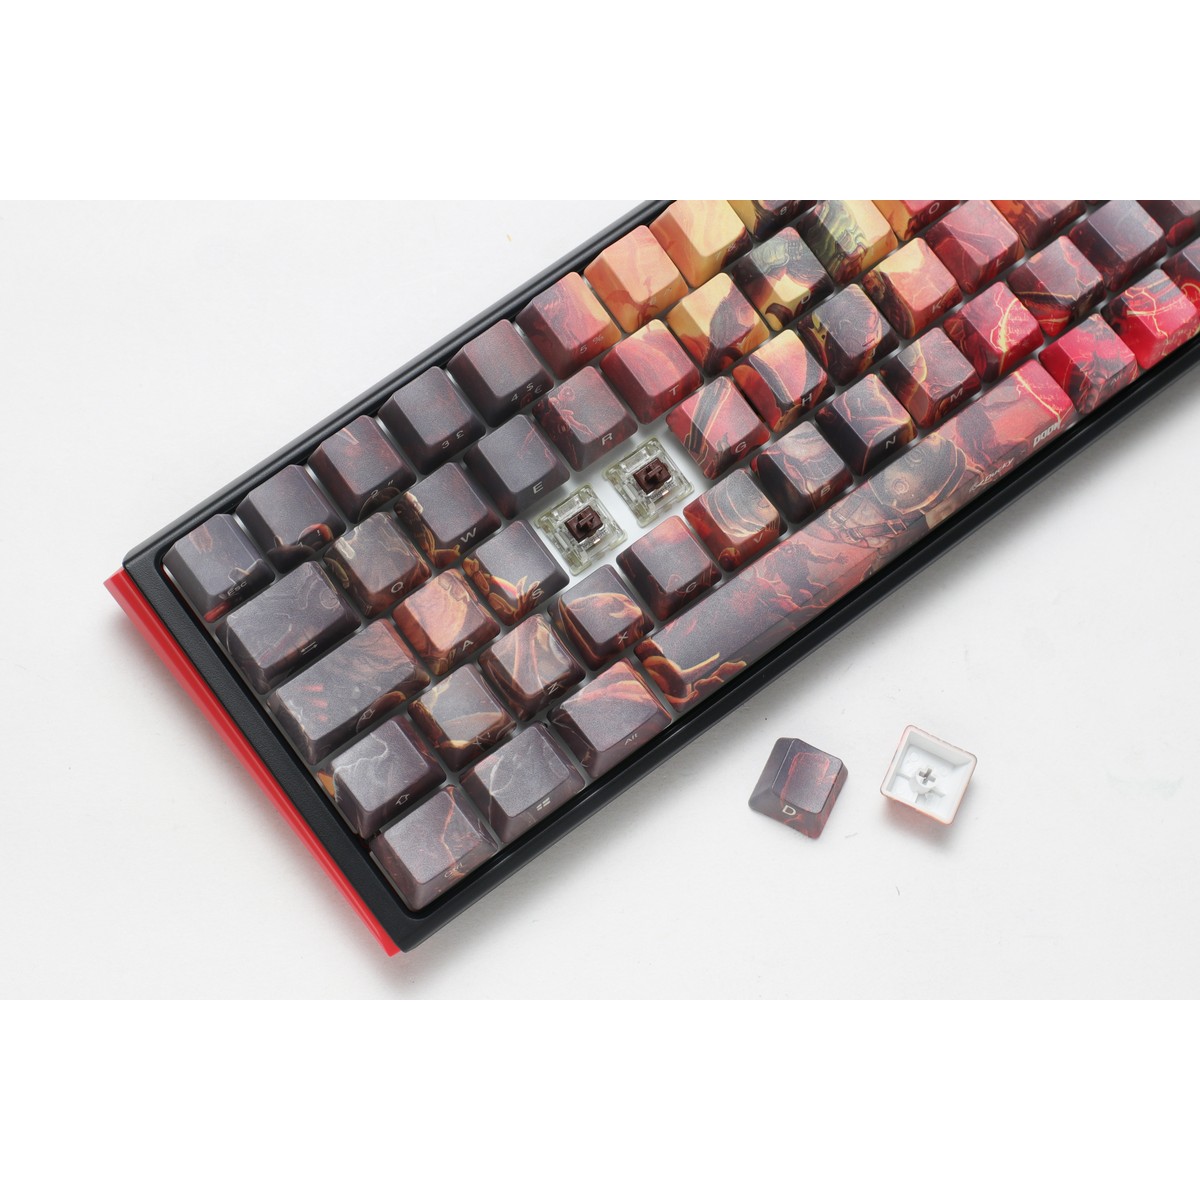 Ducky - Ducky x DOOM SF 65% Gaming Keyboard Limited Edition Cherry MX Brown Switches UK